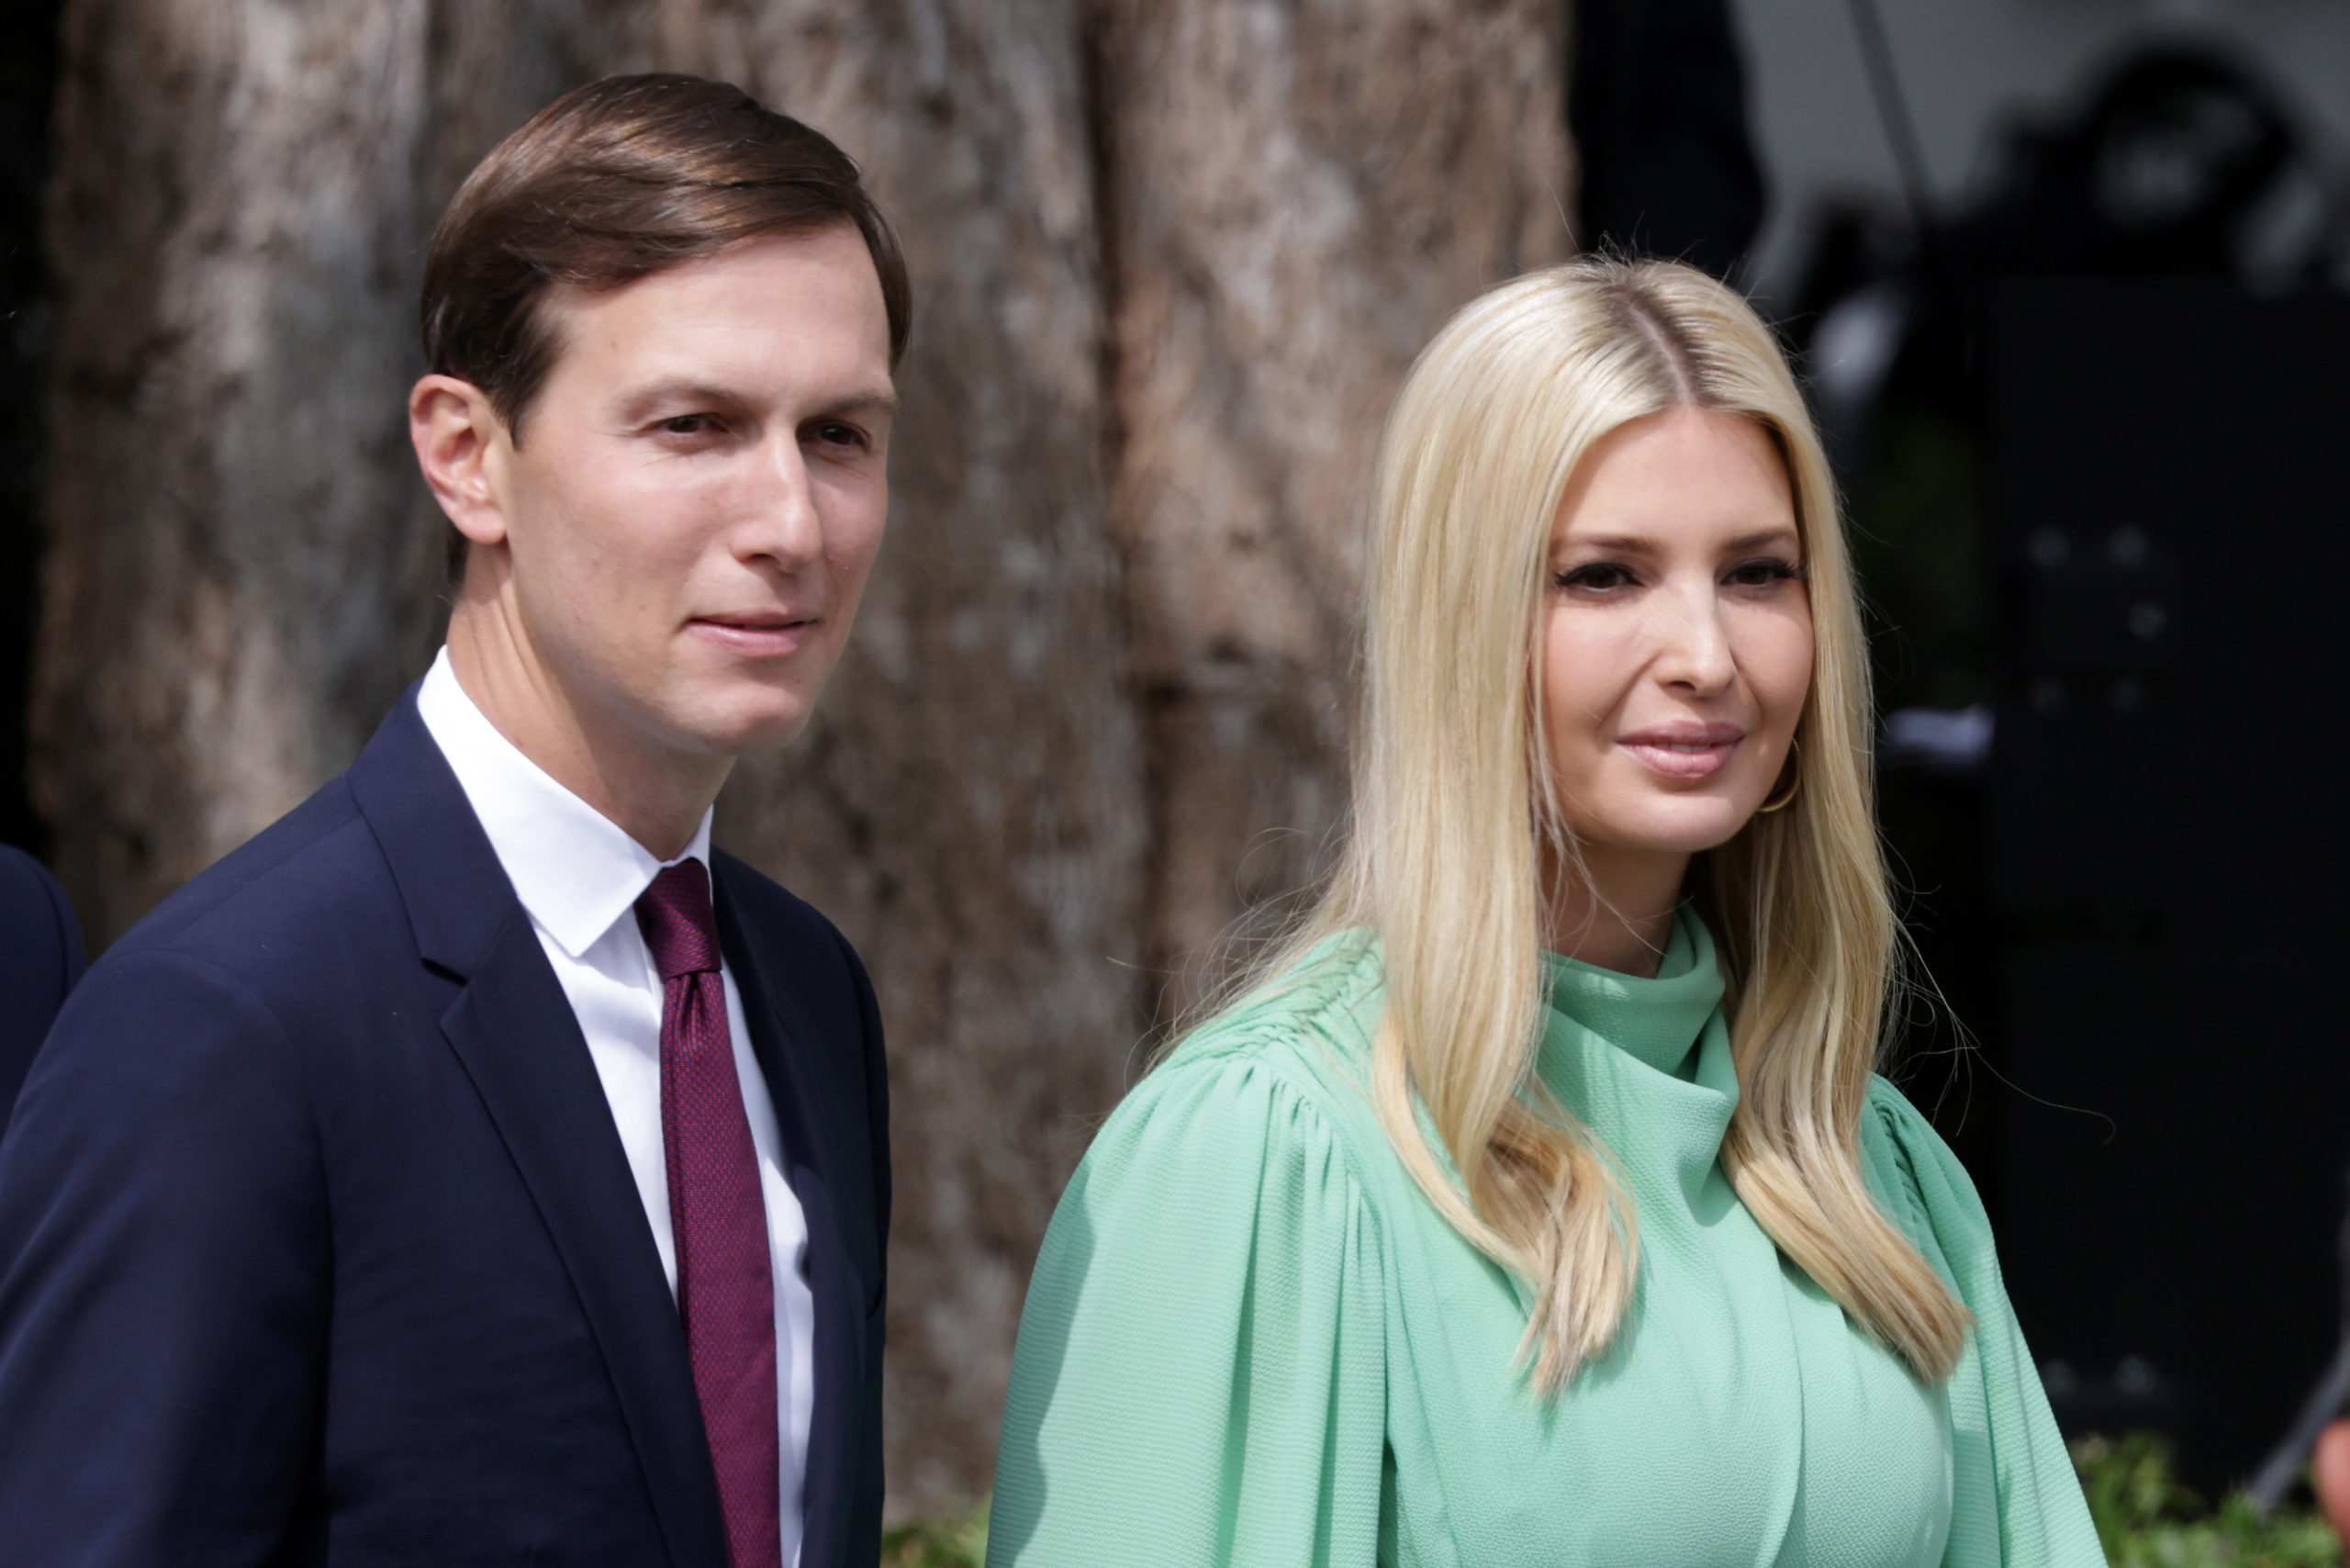 Jared Kushner and Ivanka Trump arrive to the signing ceremony of the Abraham Accords on the South Lawn of the White House. (Photo by Alex Wong/Getty Images)